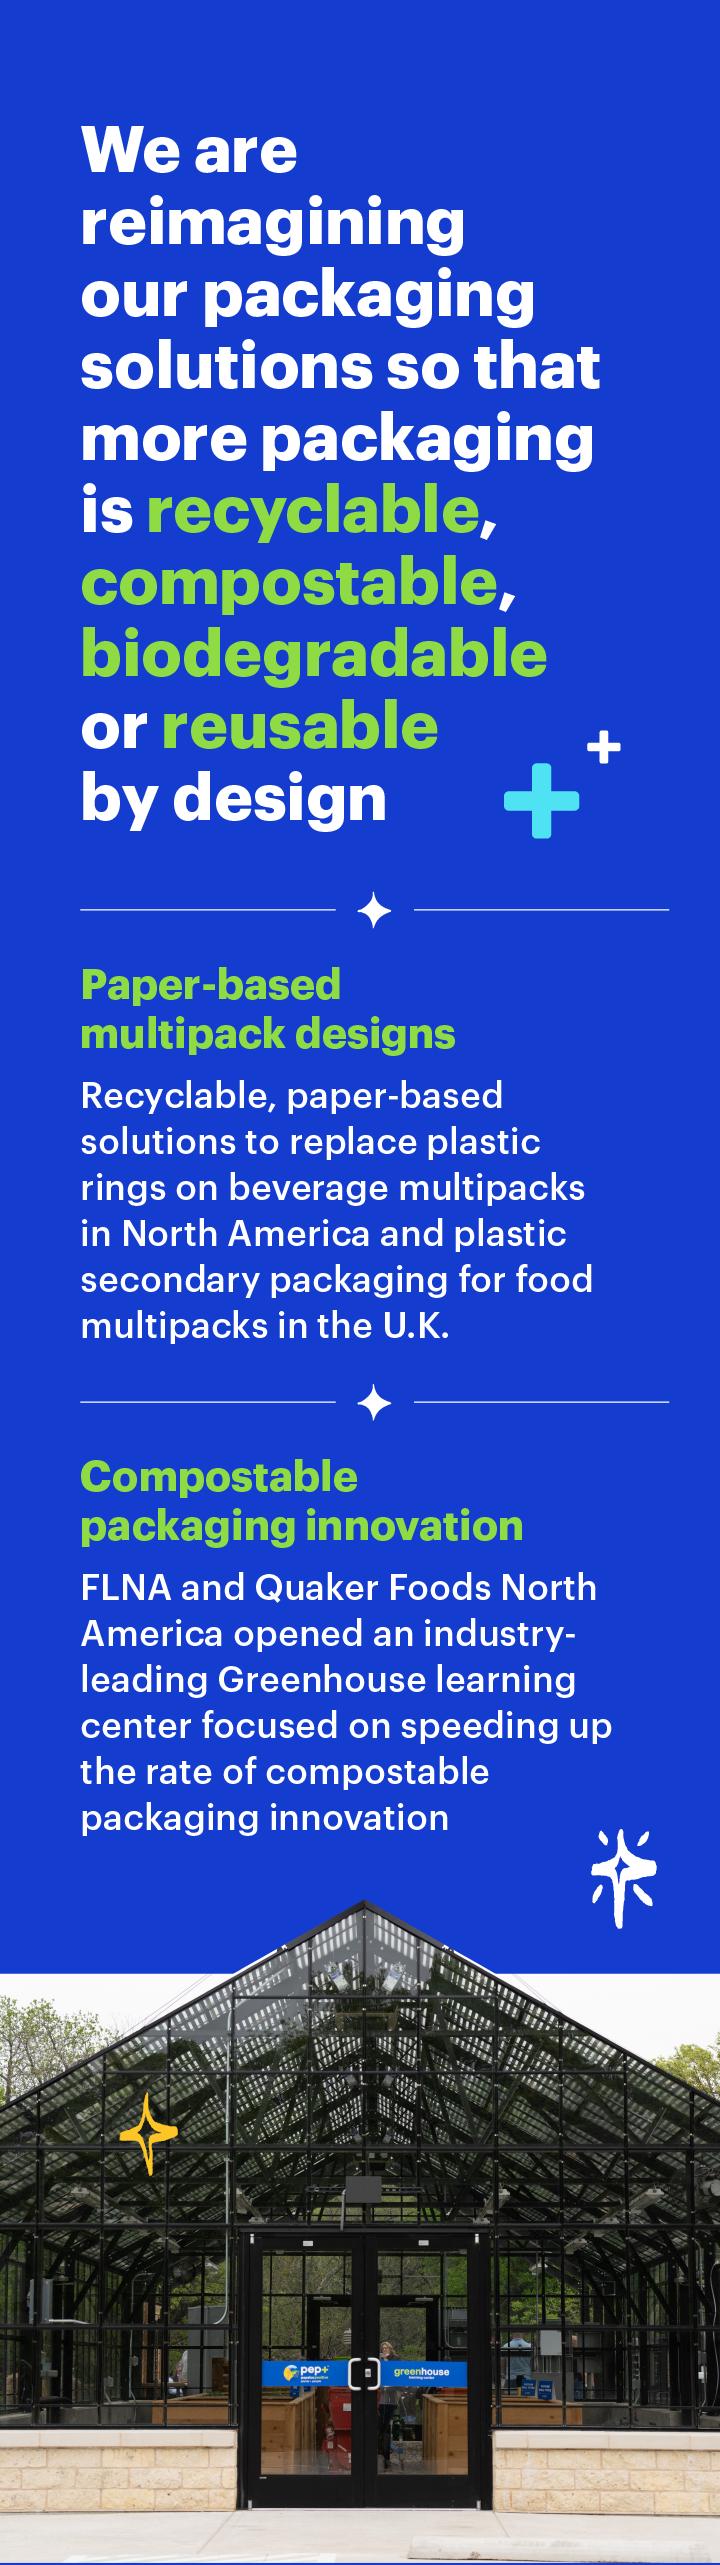 We are reimagining our packaging solutions so that more packaging is recyclable, compostable, biodegradable or reusable by design